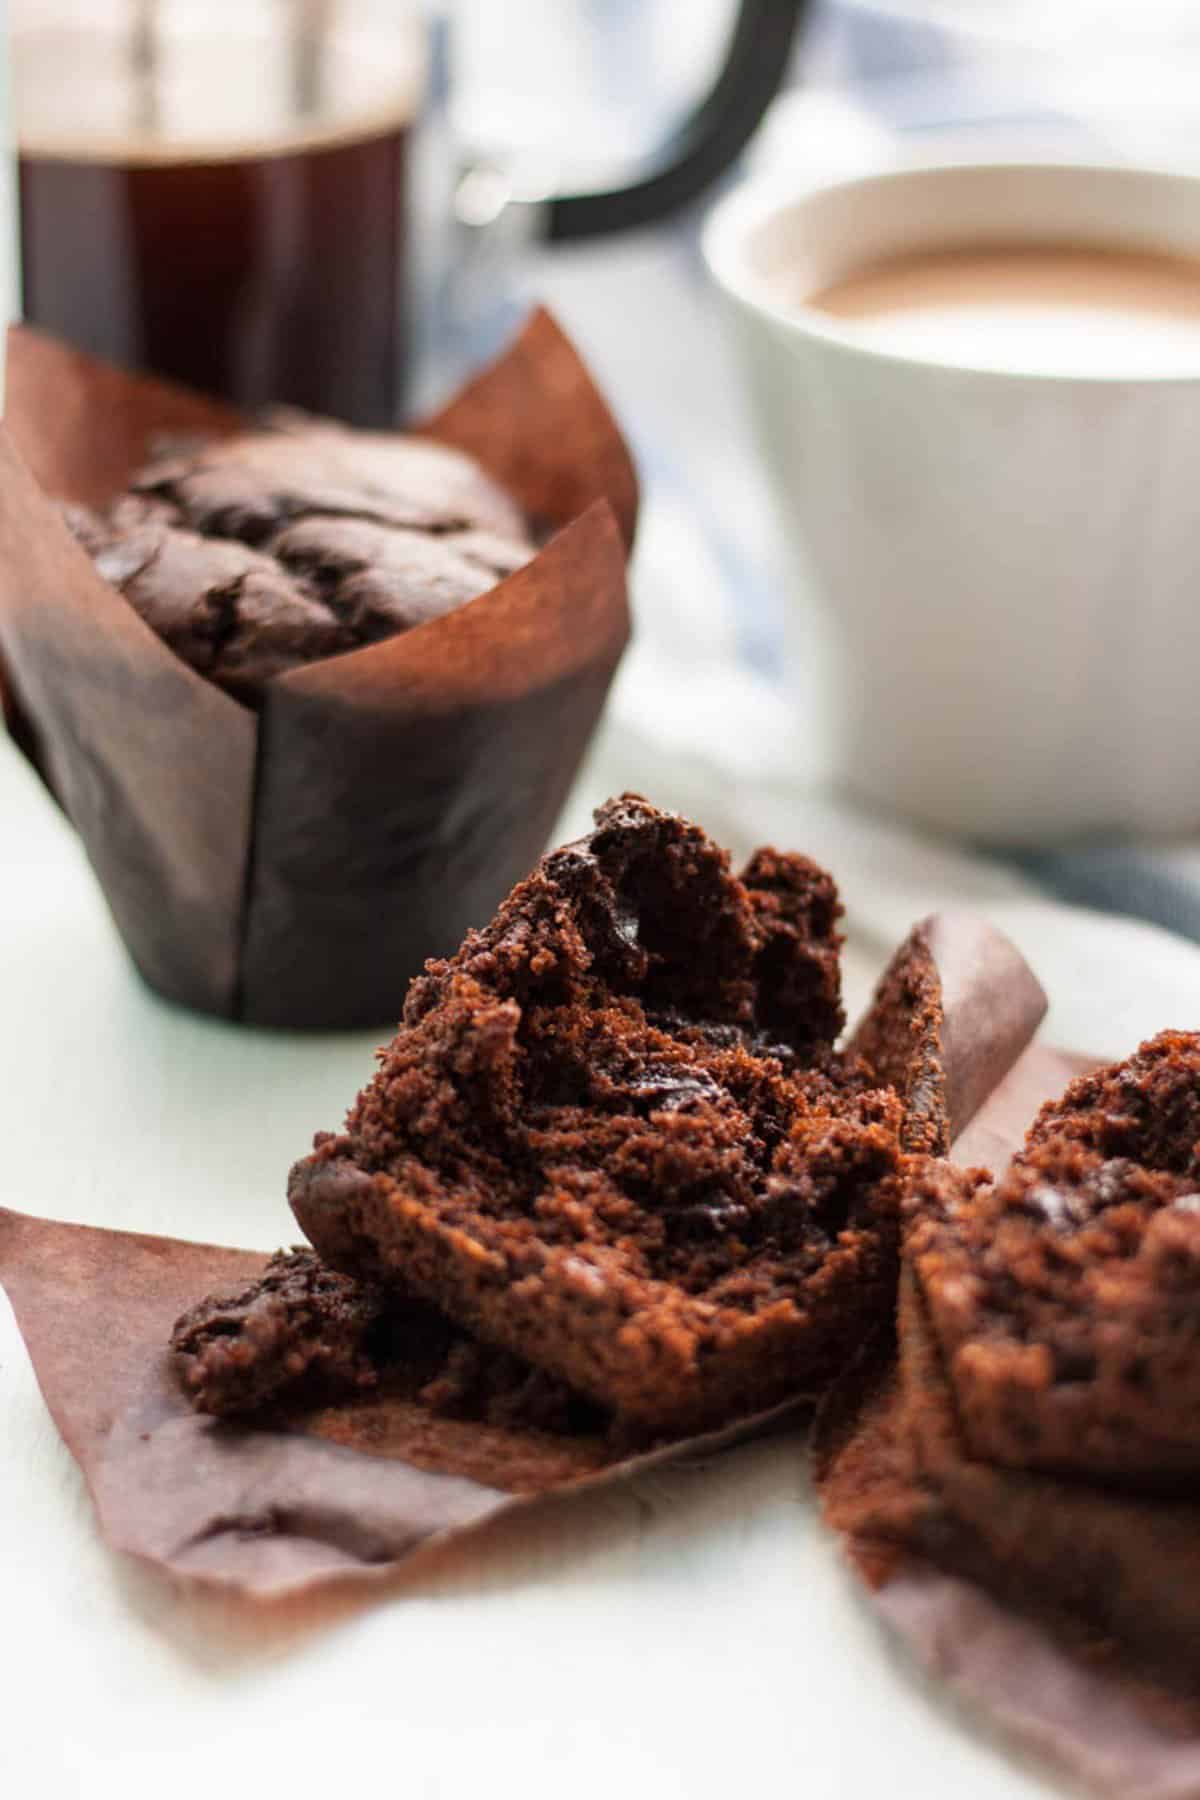 Broken open chocolate chip muffin with a mug in the background.